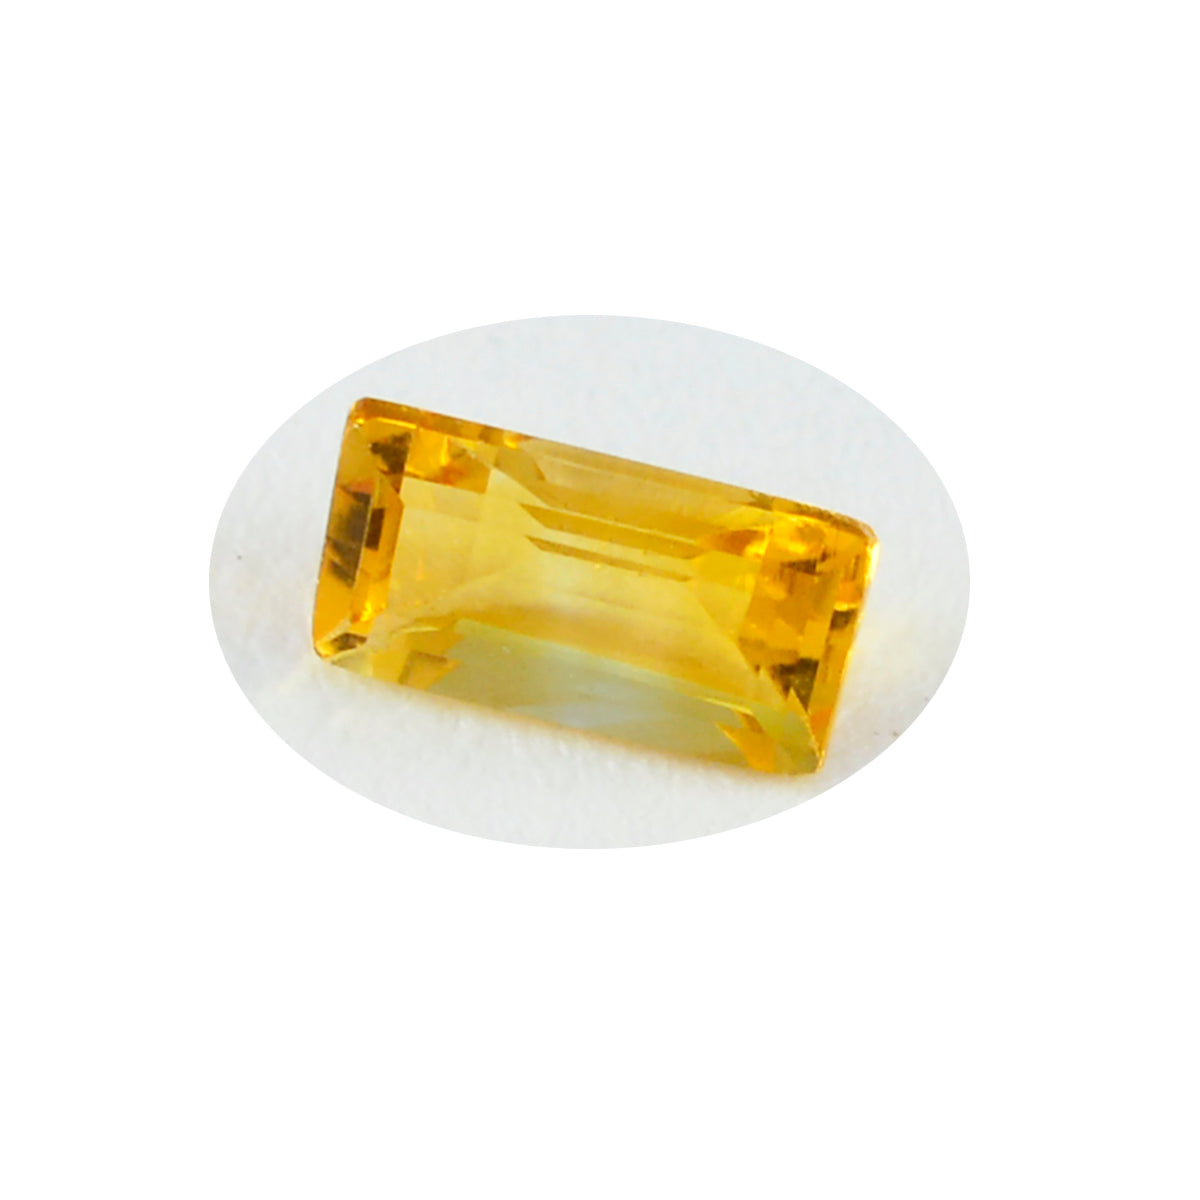 Riyogems 1PC Real Yellow Citrine Faceted 5x10 mm  Baguette Shape awesome Quality Loose Gem